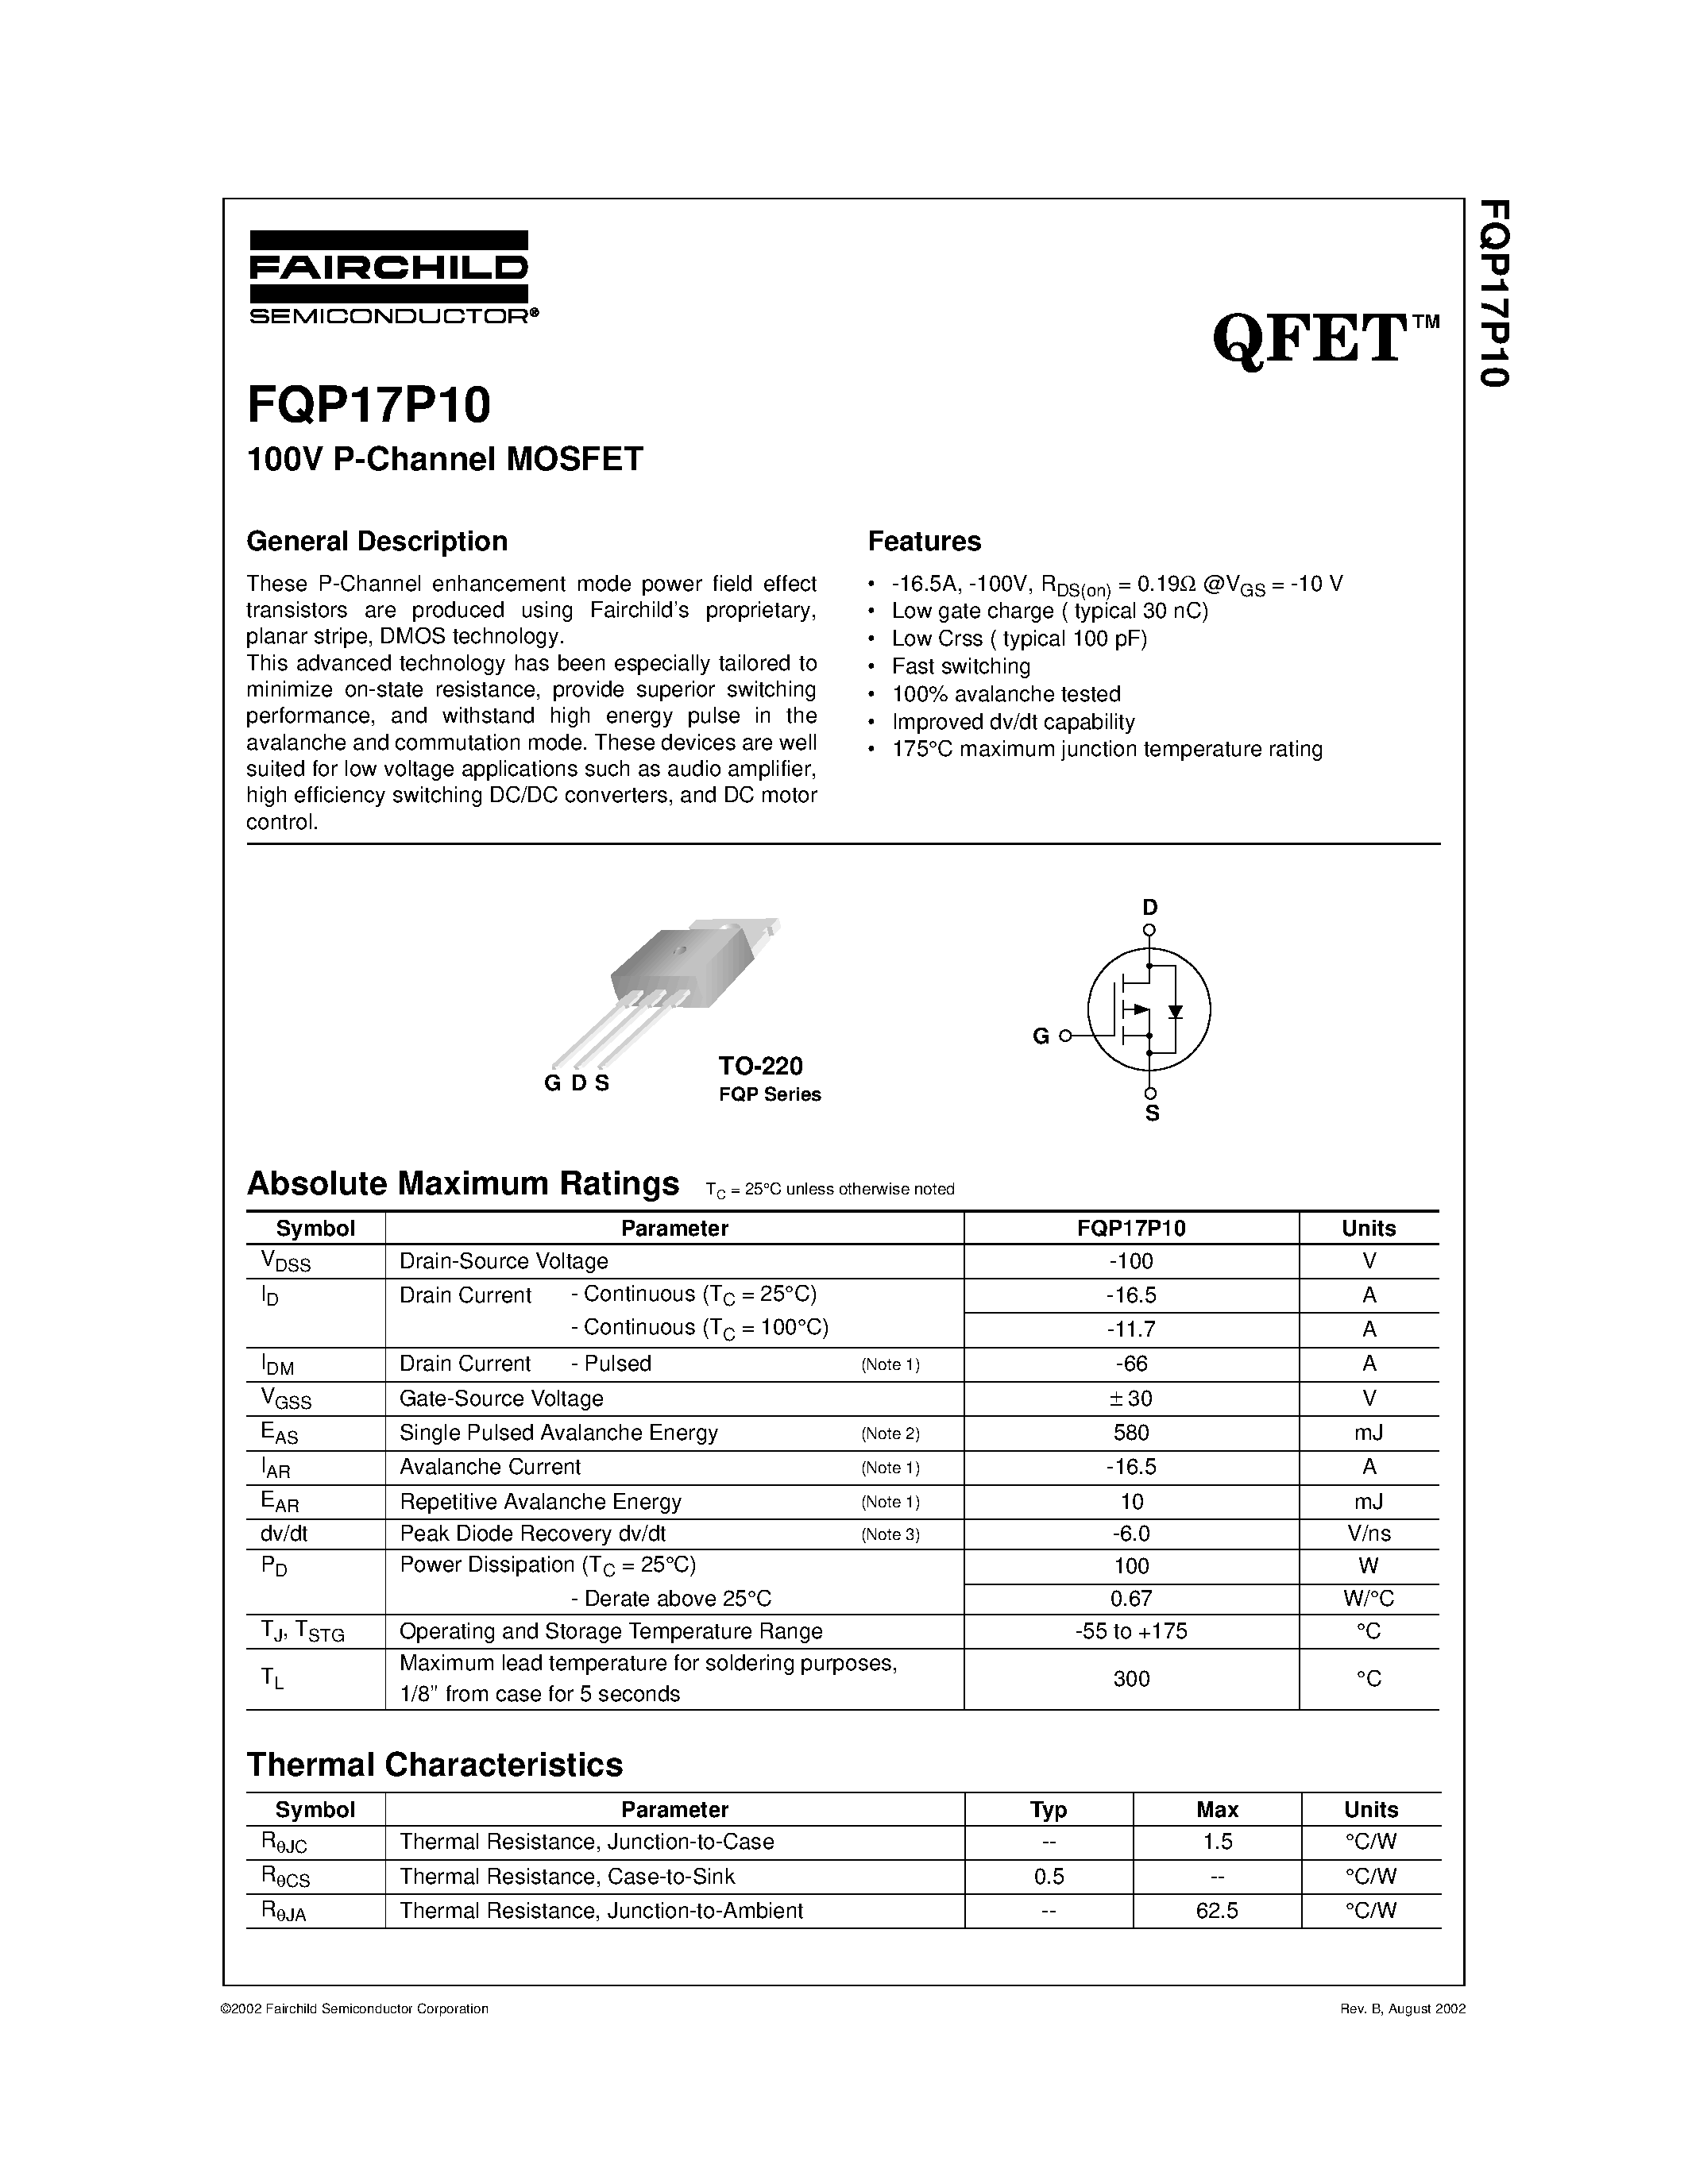 Datasheet FQP17P10 - 100V P-Channel MOSFET page 1